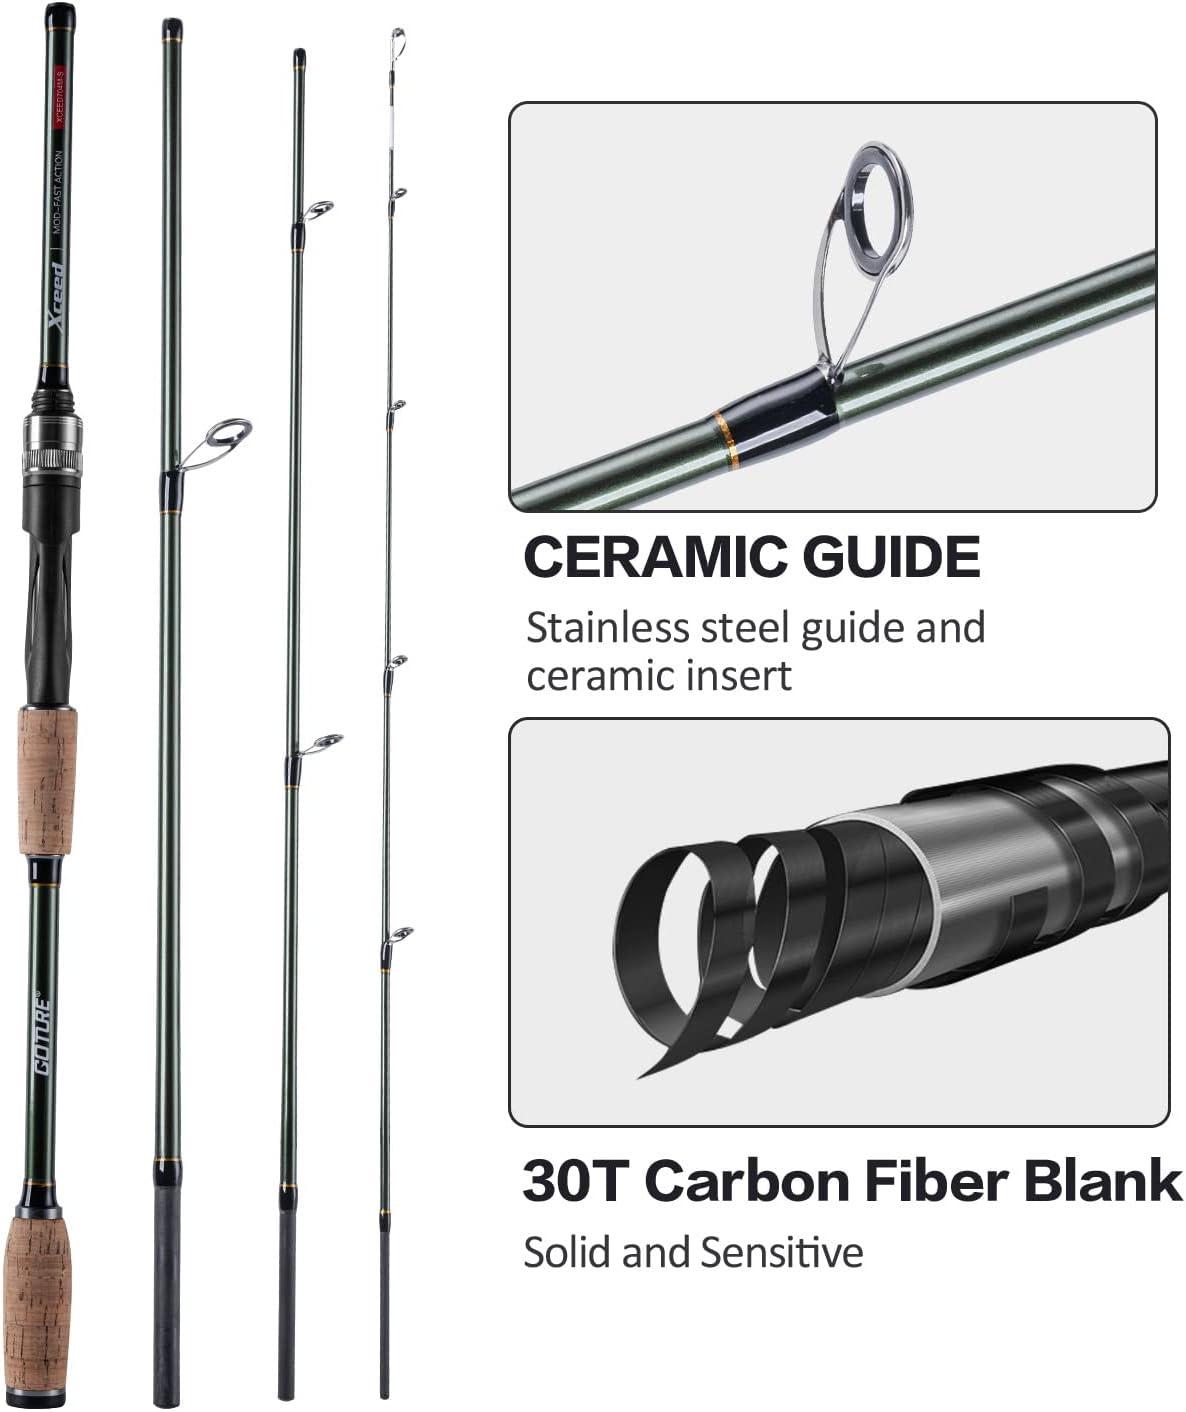 Goture Travel Fishing Rods 2 Piece/4 Piece Fishing Pole with Case/Bag Fly  Fishing Kit/Surf Casting/Spinning Rod Ultralight Fishing Baitcast Rod 6ft- 12ft for Saltwater Trout Bass Walleye Pike 4 Piece Fishing Rod Dark